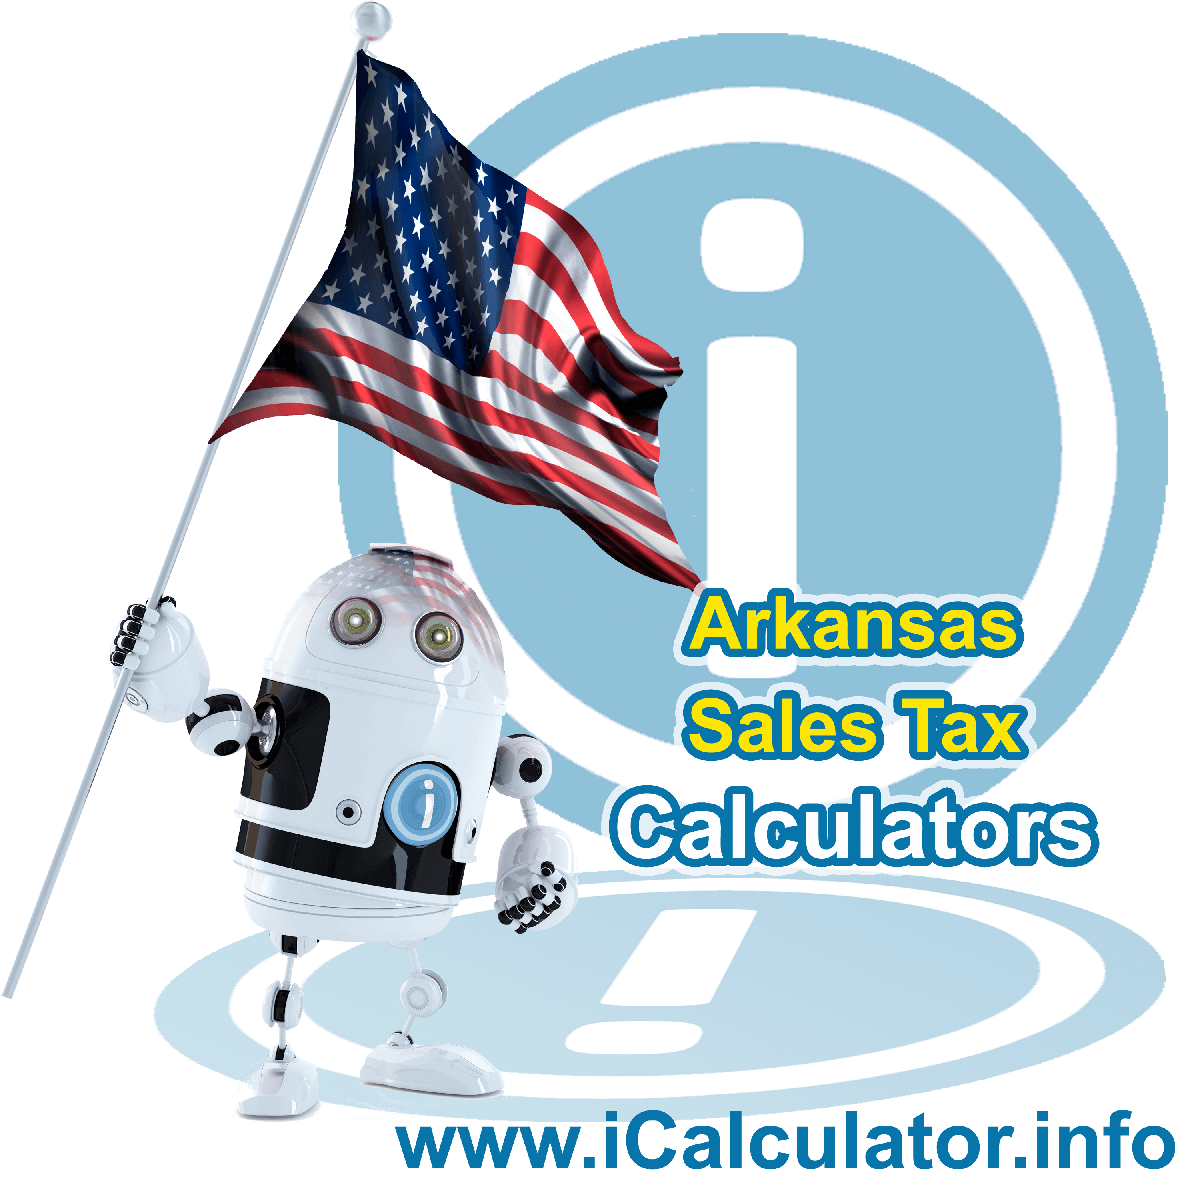 Springdale Sales Rates: This image illustrates a calculator robot calculating Springdale sales tax manually using the Springdale Sales Tax Formula. You can use this information to calculate Springdale Sales Tax manually or use the Springdale Sales Tax Calculator to calculate sales tax online.